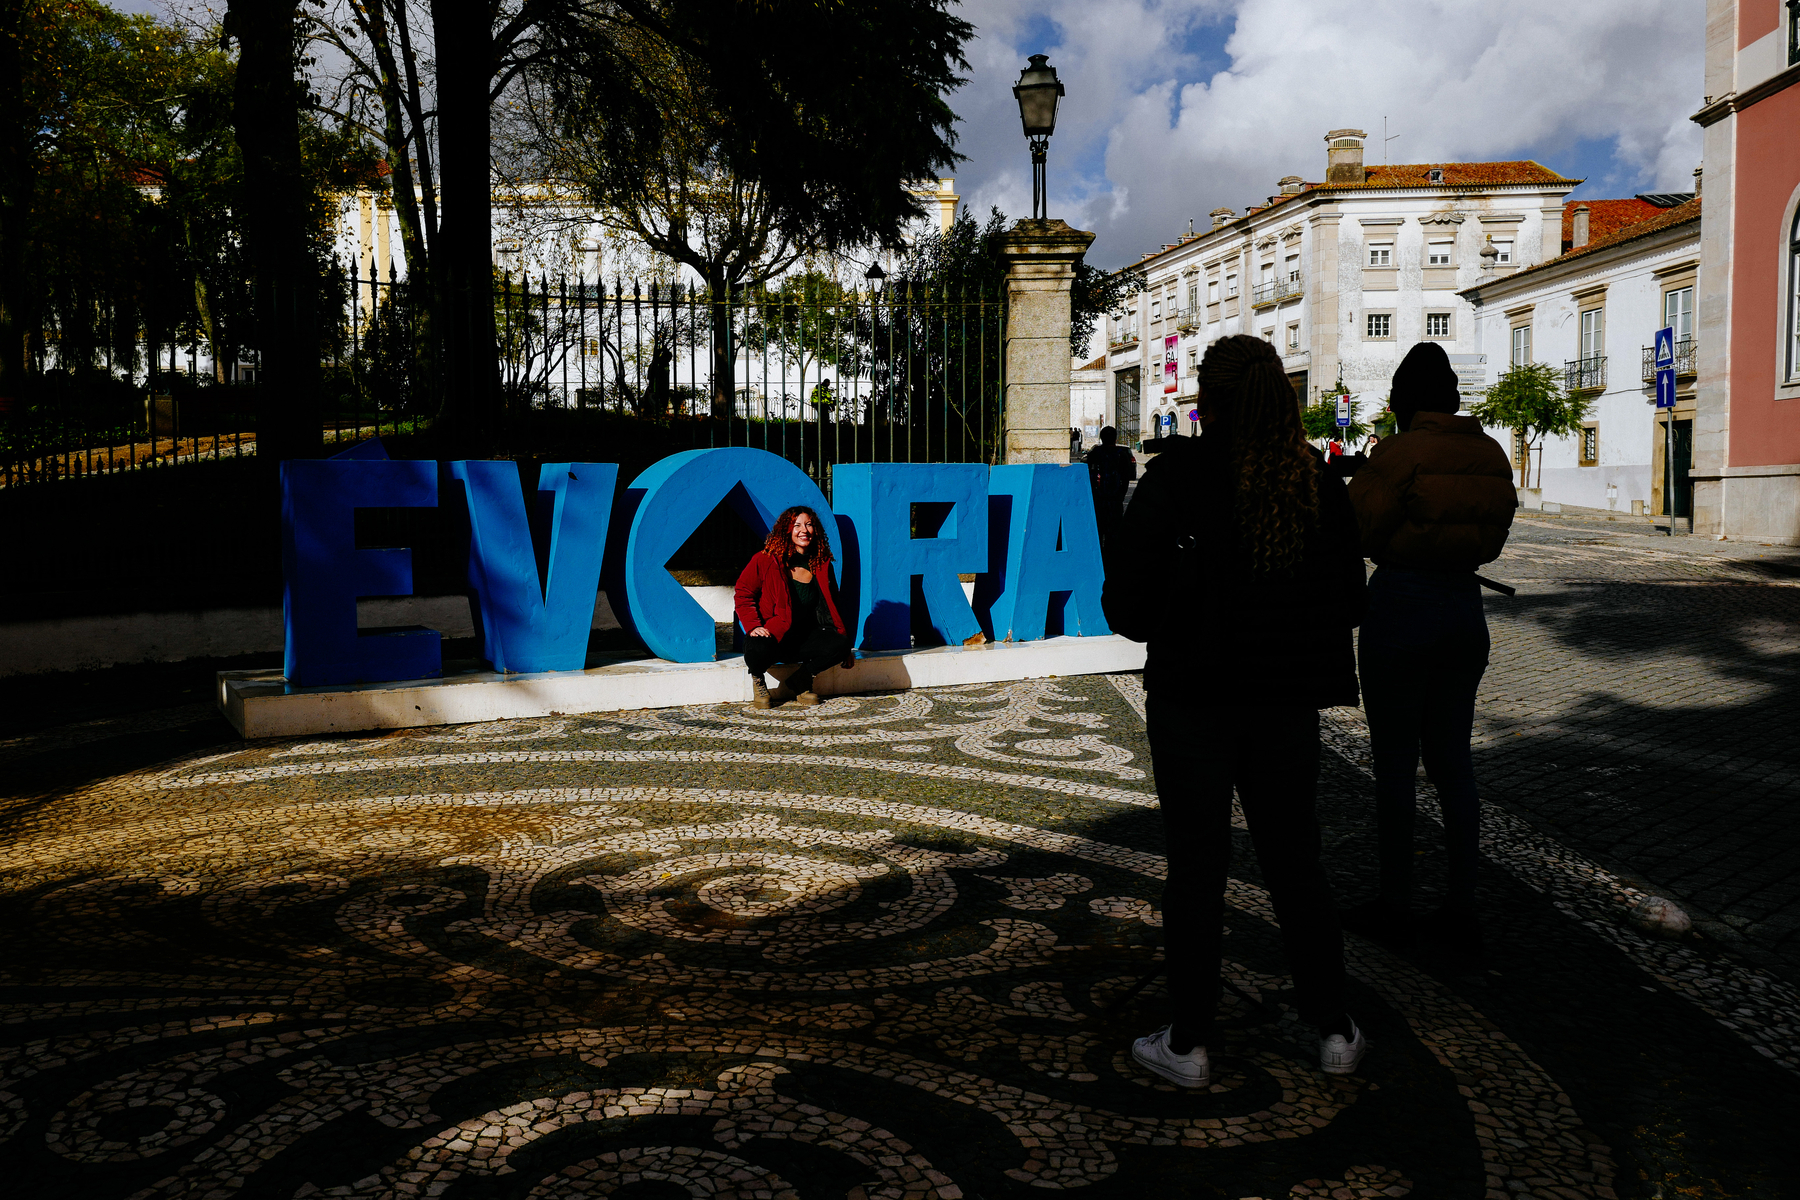 People take photos in front of an “Evora” sign. 